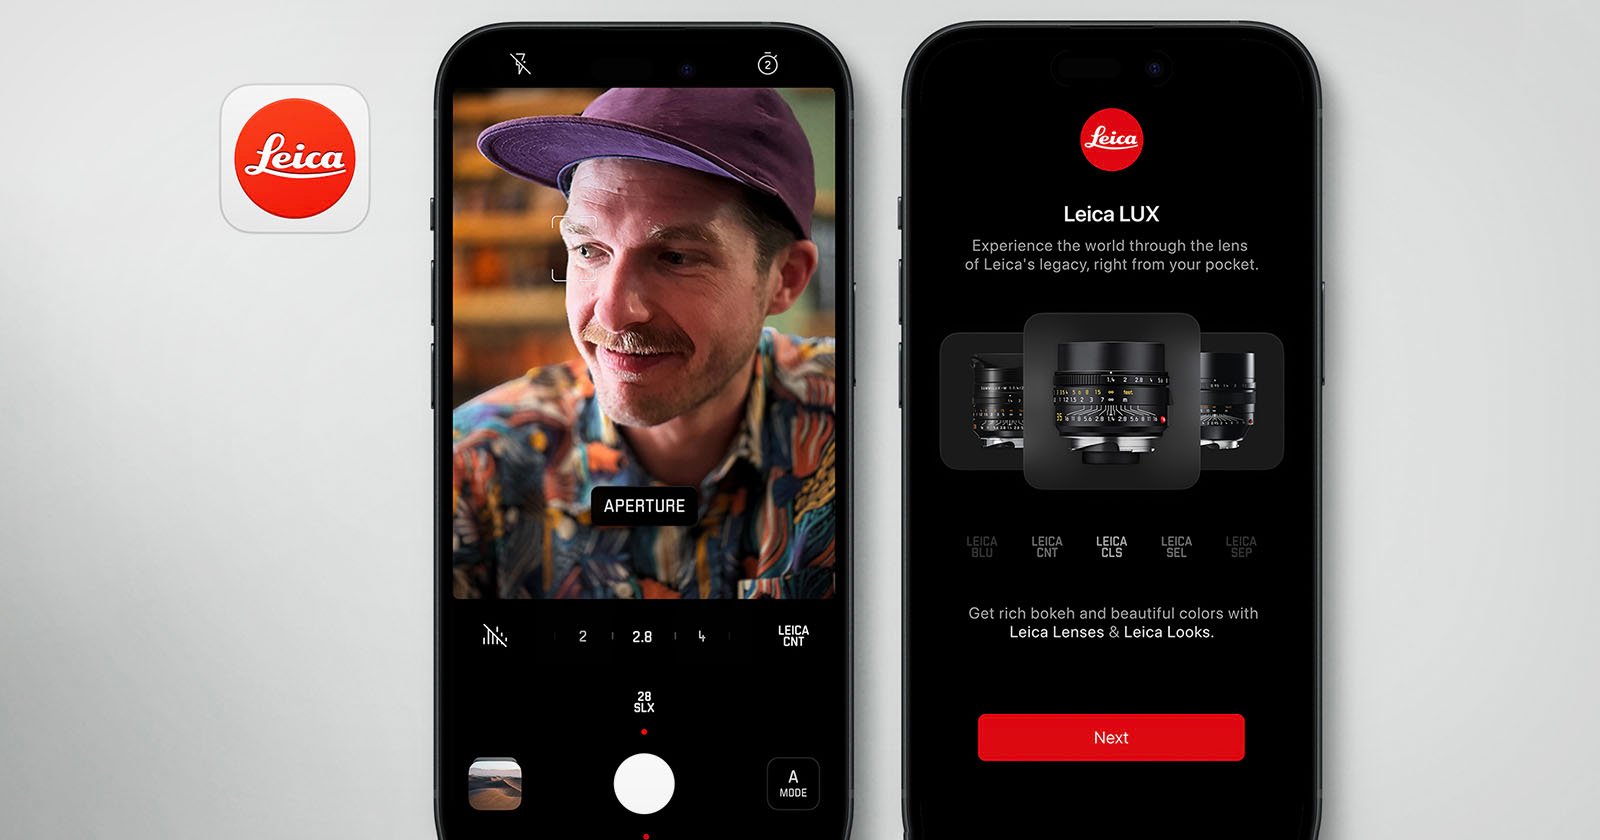 Two smartphones display different screens. The left phone shows a camera app capturing a man wearing a purple cap. The right phone displays a Leica advertisement for Leica LUX lenses and Leica Looks, with a red "Next" button at the bottom and the Leica logo at the top.